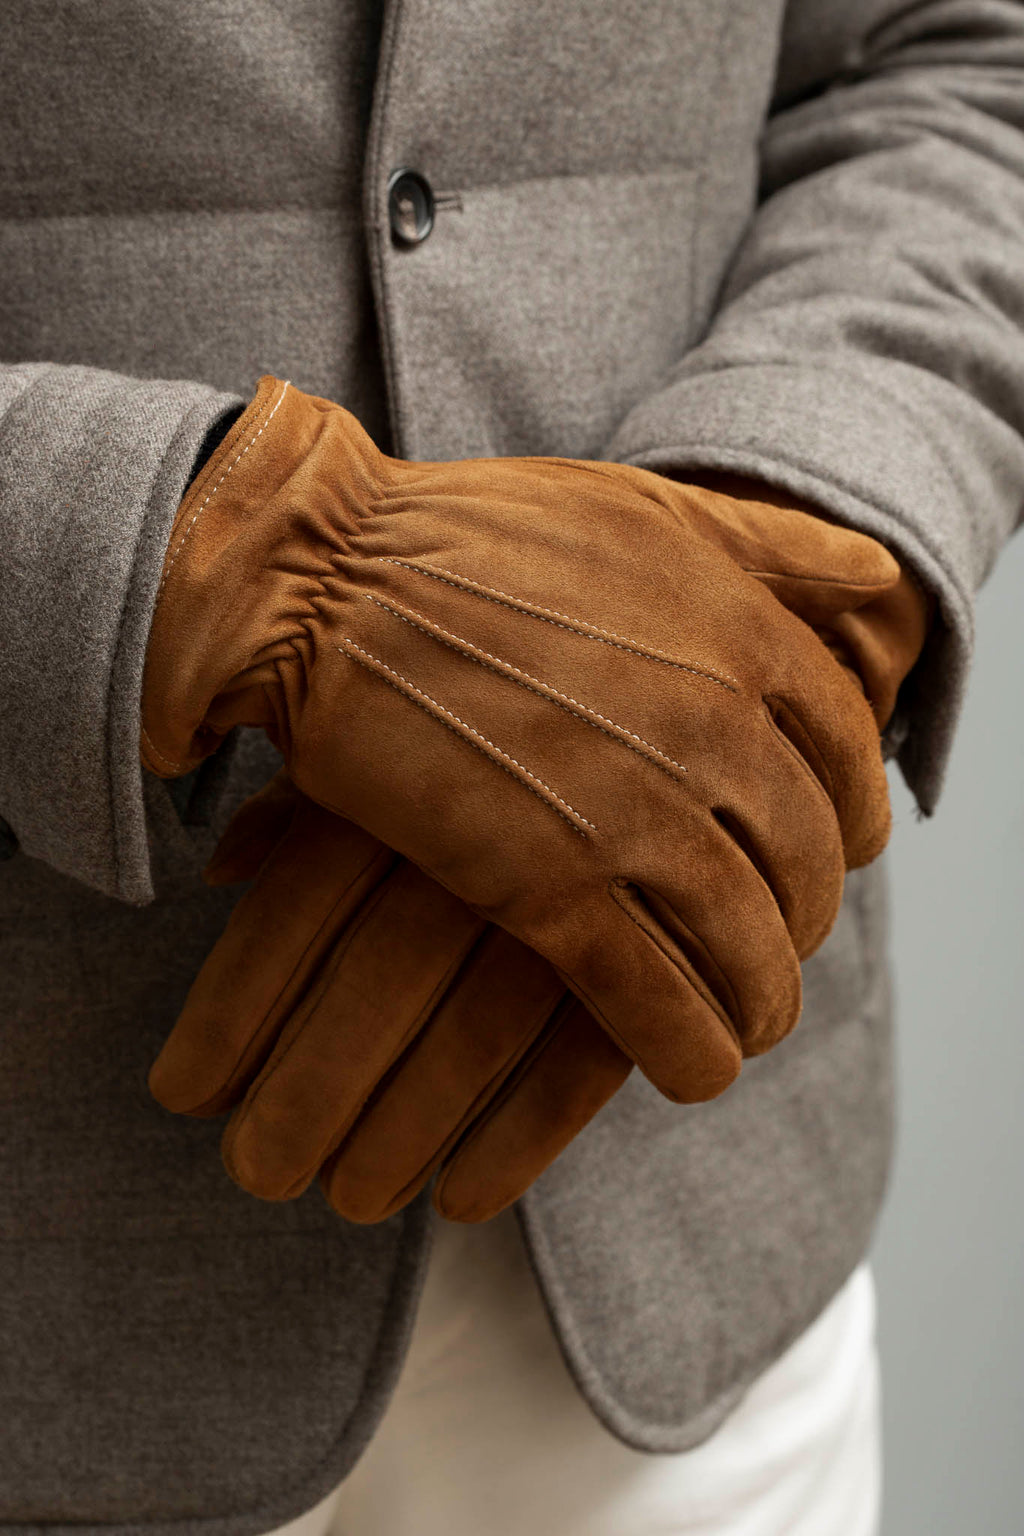 Gloves Made in Italy - Merola Gloves Made in Italy